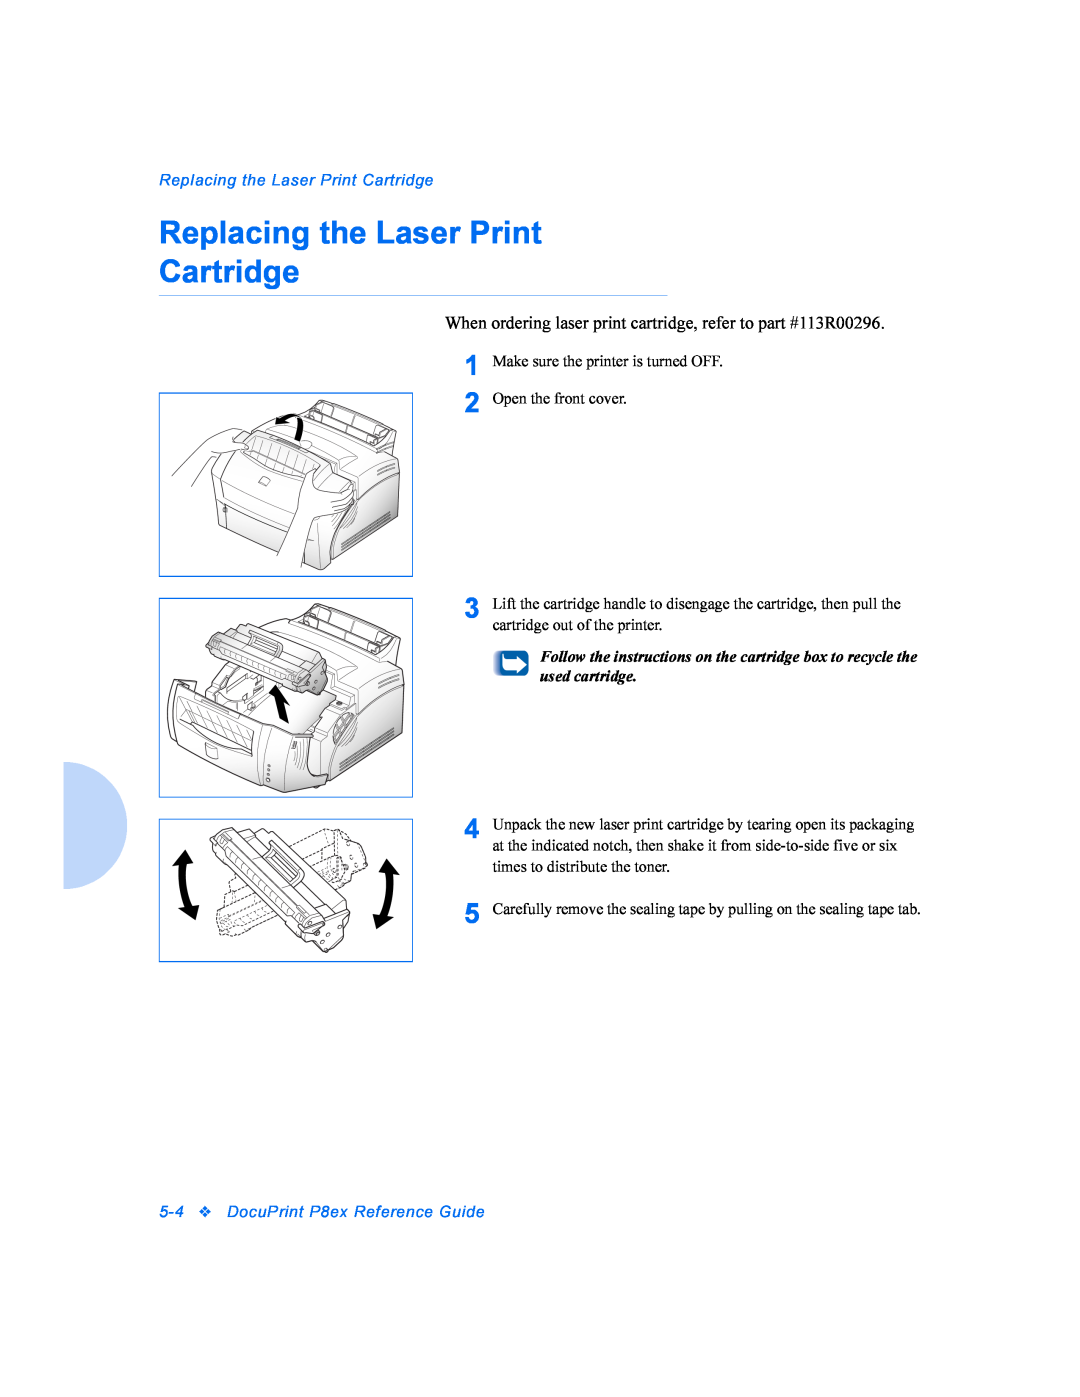 Xerox P8EX manual Replacing the Laser Print Cartridge, 5-4DocuPrint P8ex Reference Guide 